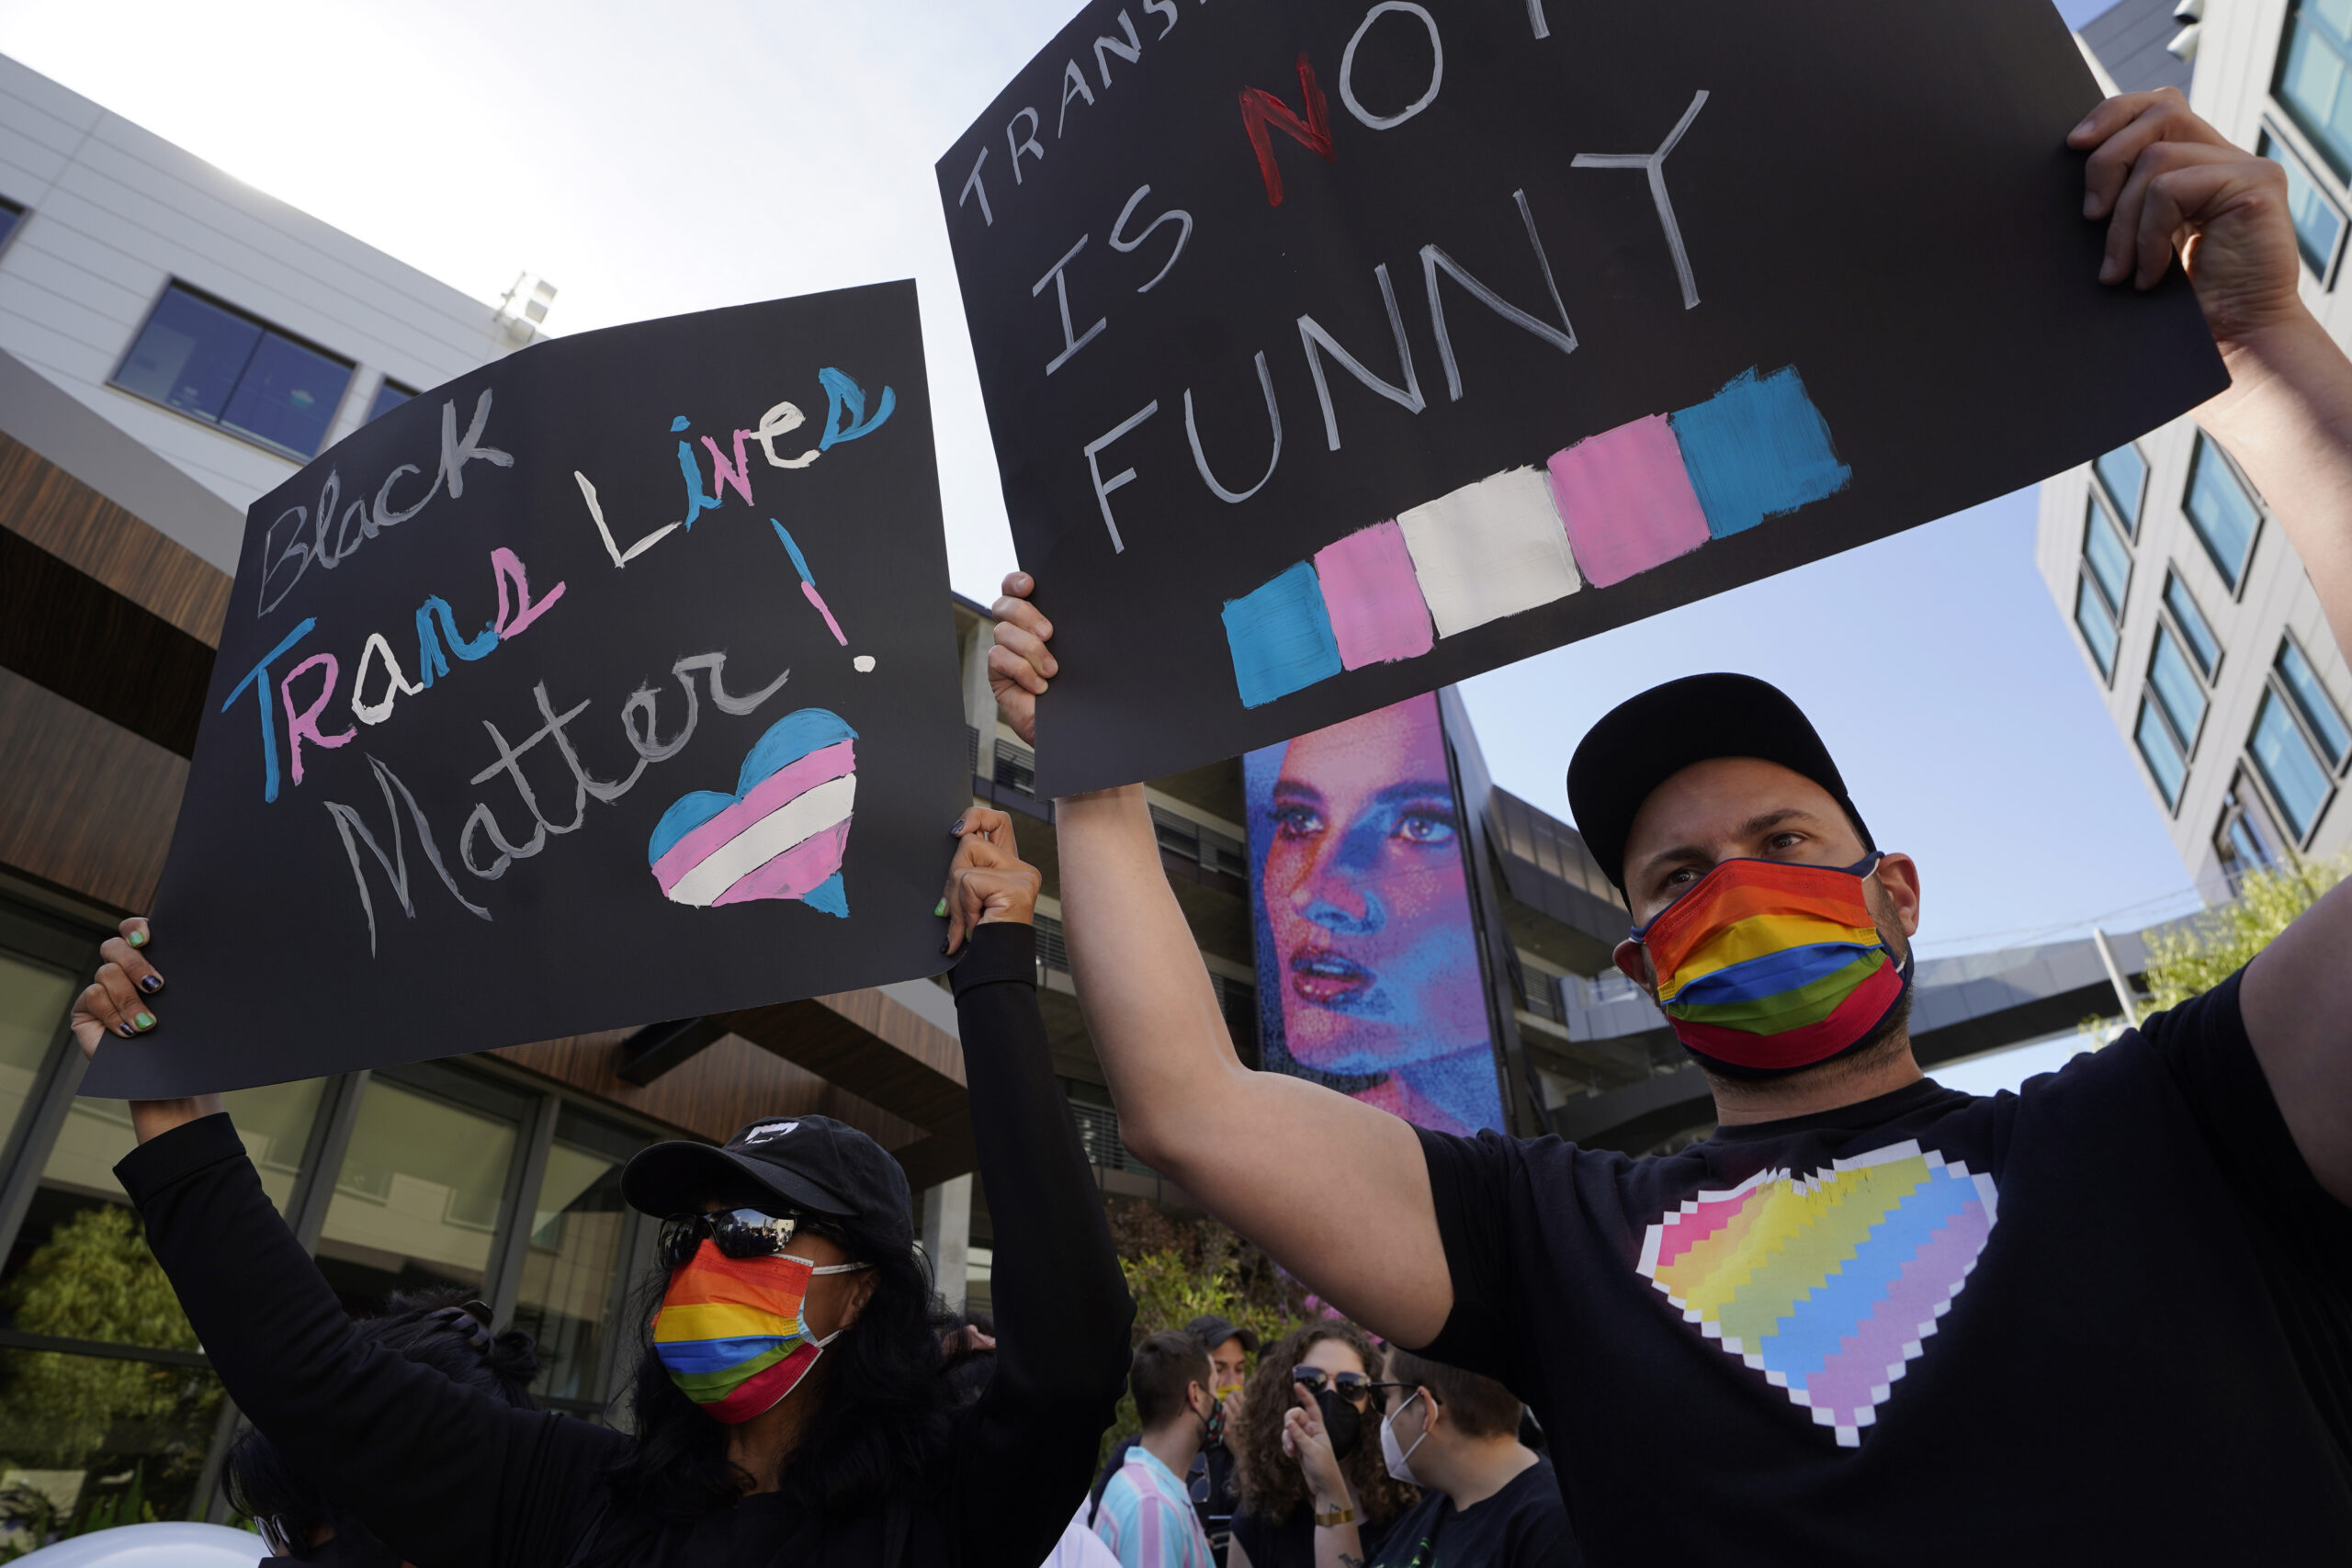 People protest outside the Netflix building on Vine Street in the Hollywood section of Los Angeles, Wednesday, Oct. 20, 2021. Critics and supporters of Dave Chappelle's Netflix special and its anti-transgender comments gathered outside the company's offices Wednesday. (AP Photo/Damian Dovarganes)